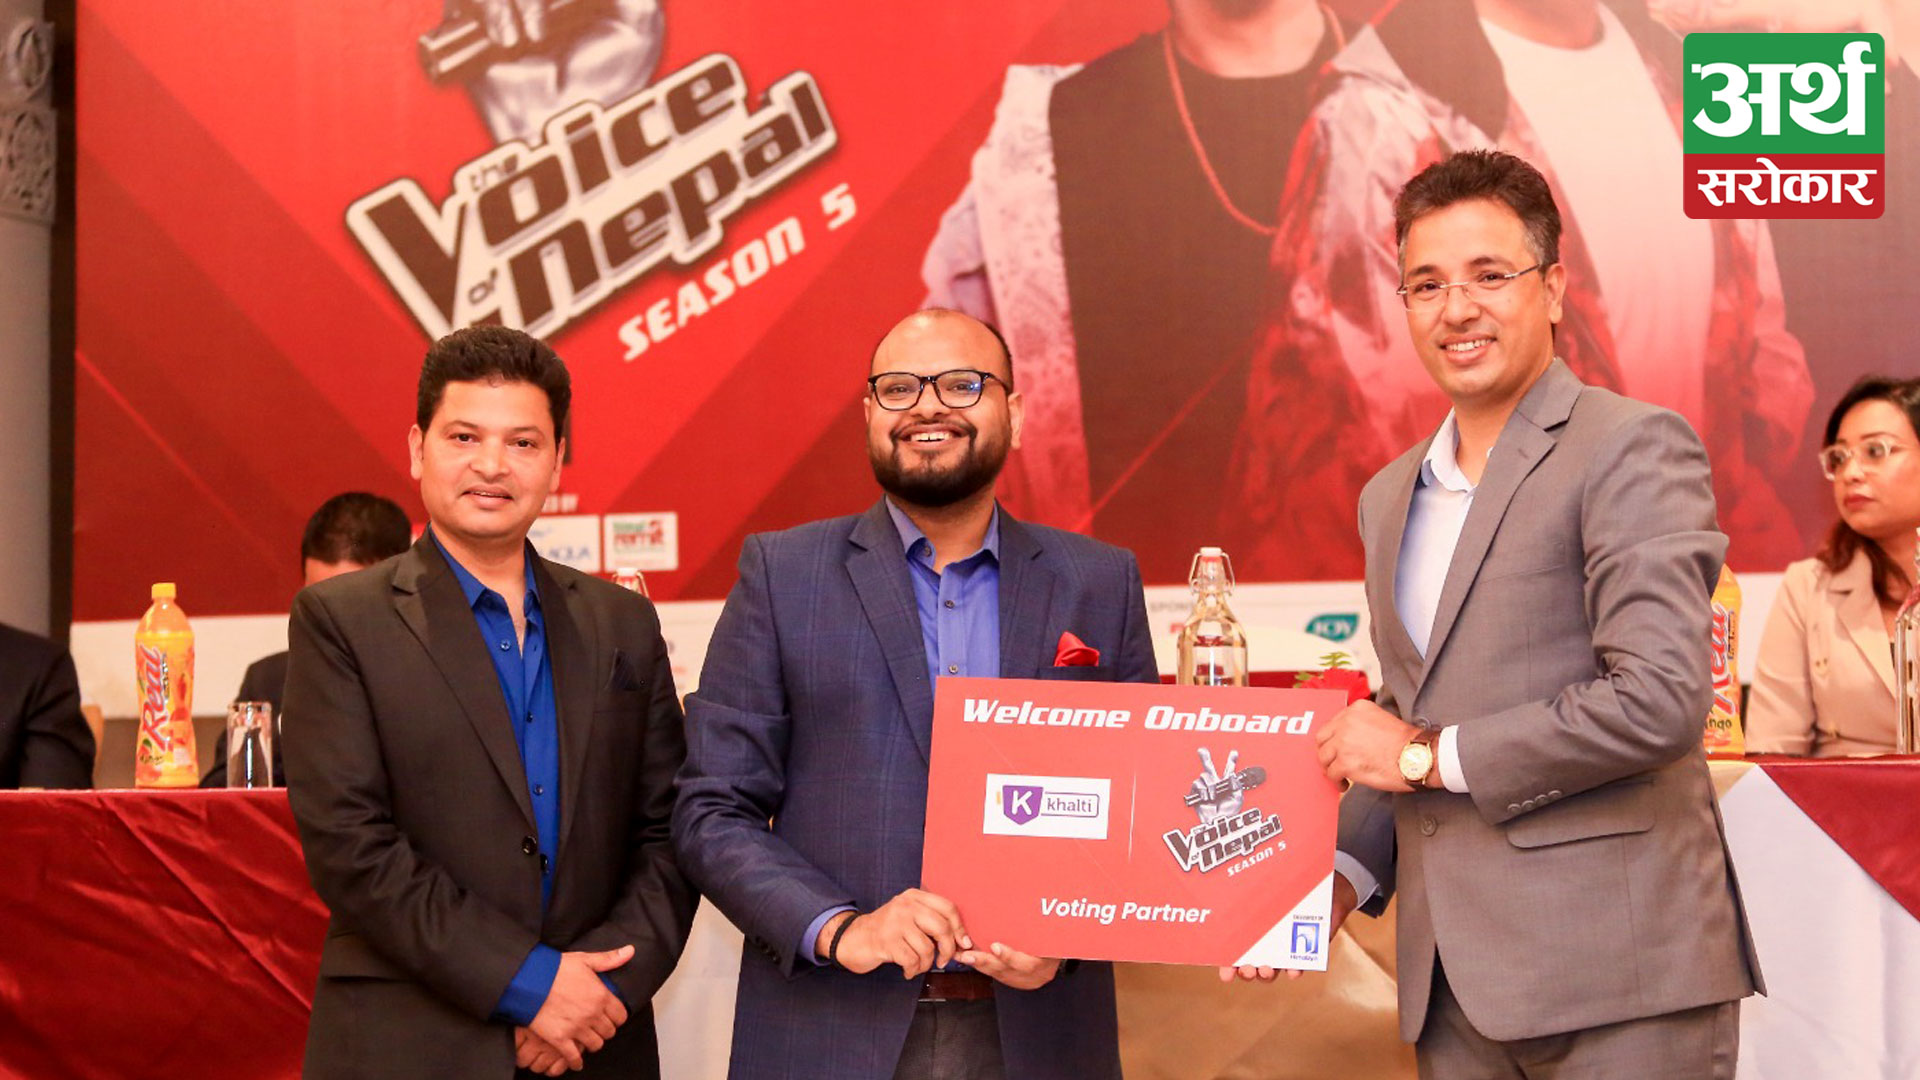 Khalti partners with ‘The Voice Nepal’ as an exclusive voting partner for season 5